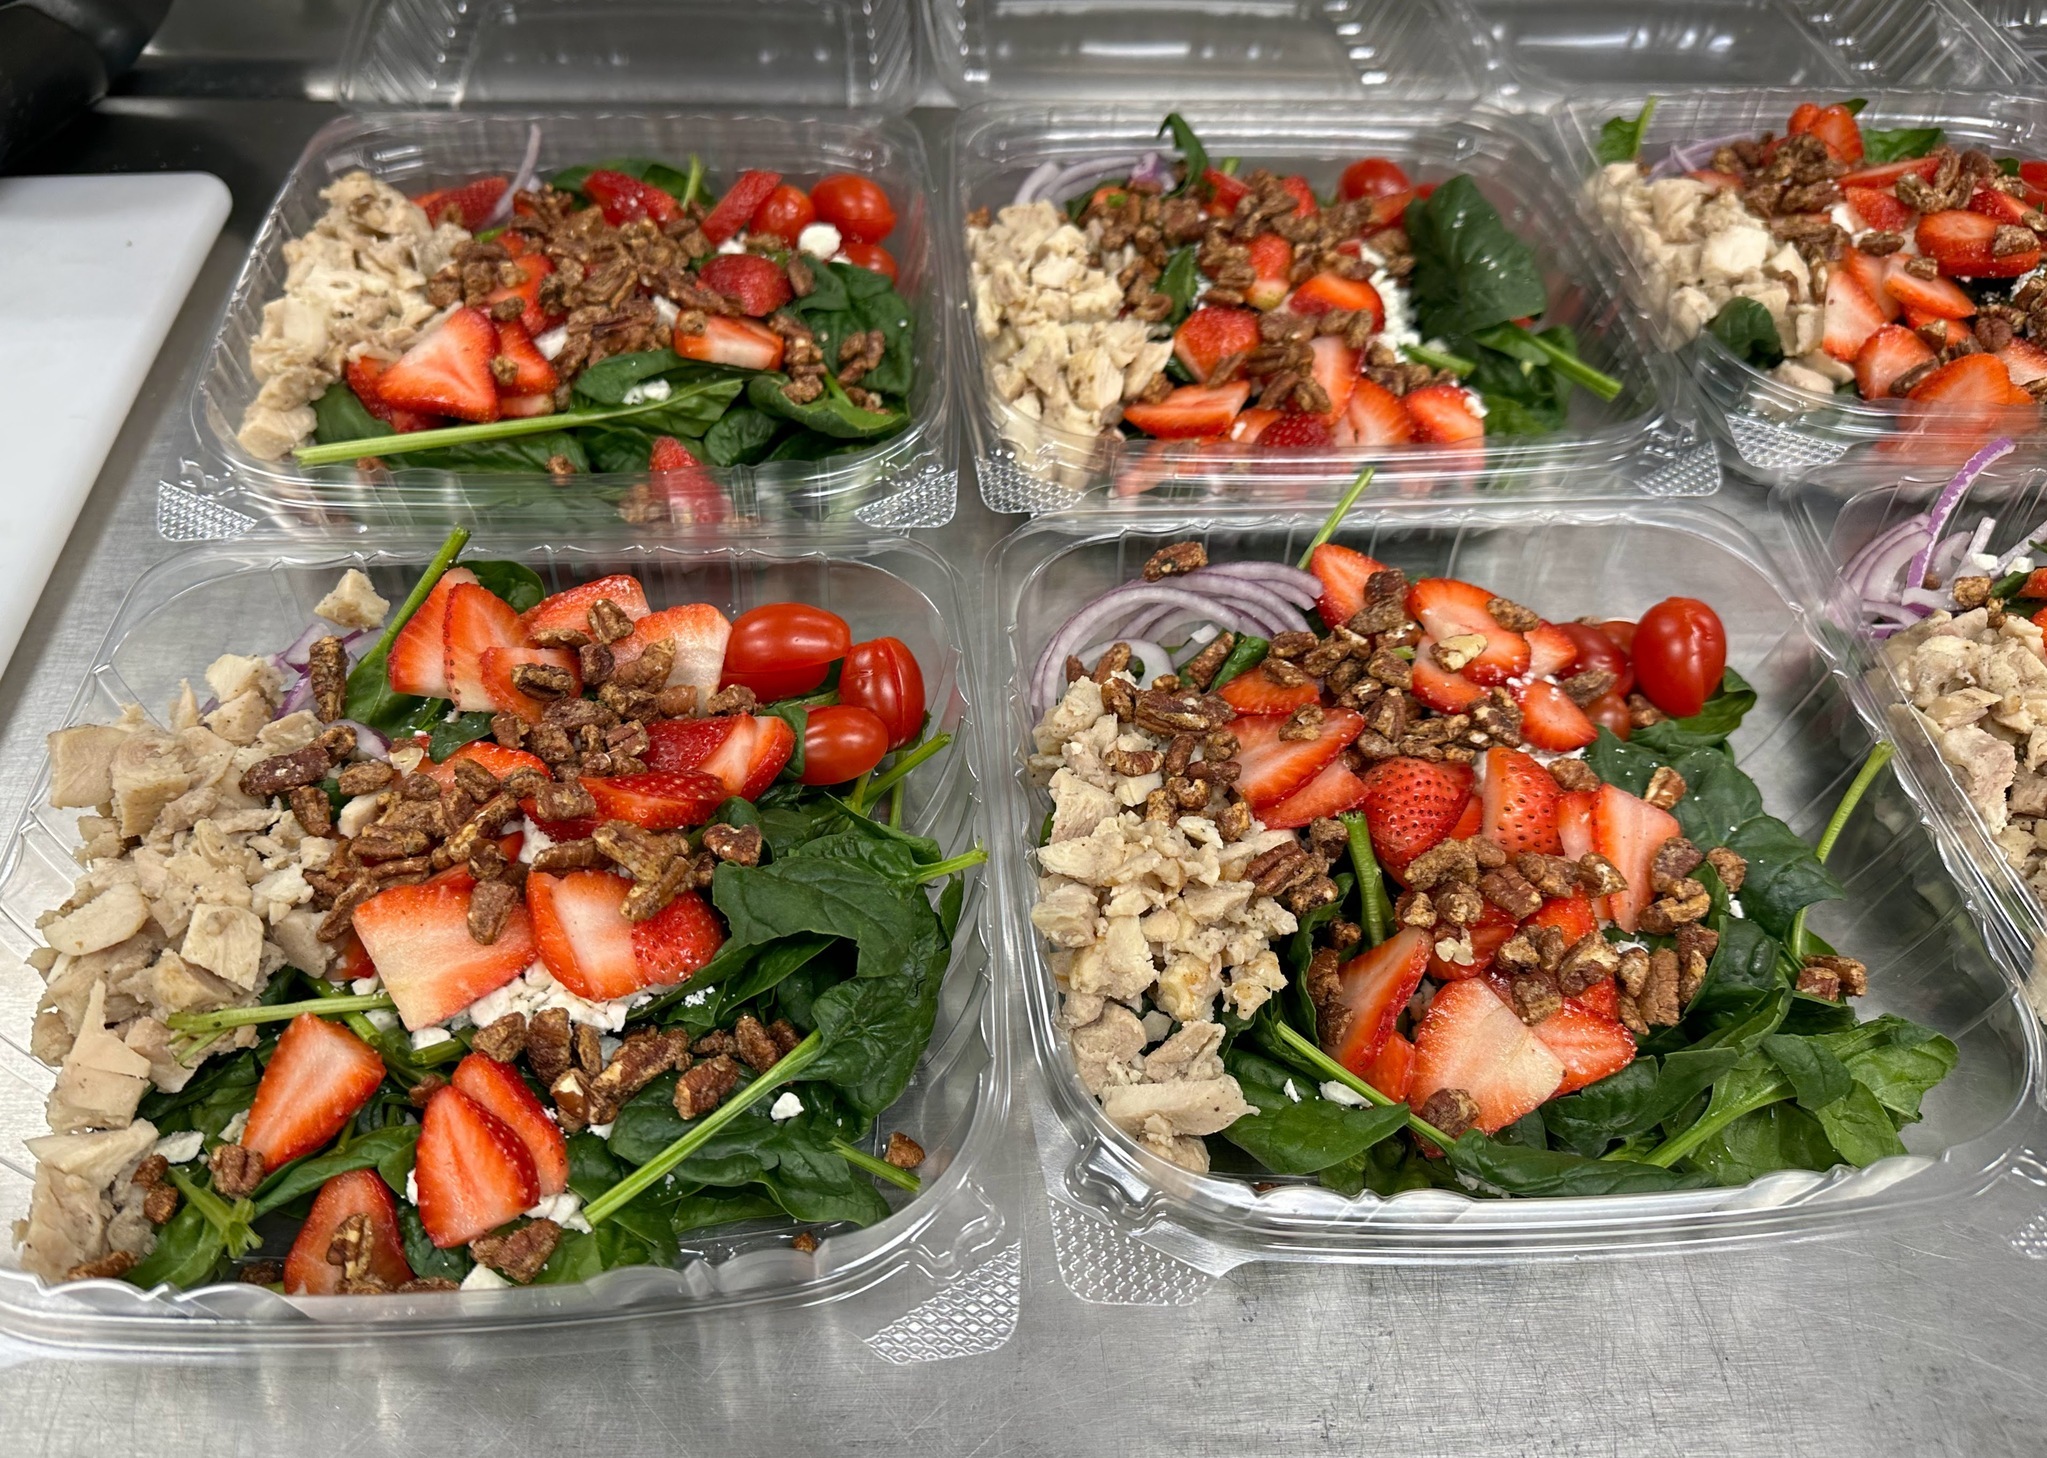 Strawberry Spinach specialty salad